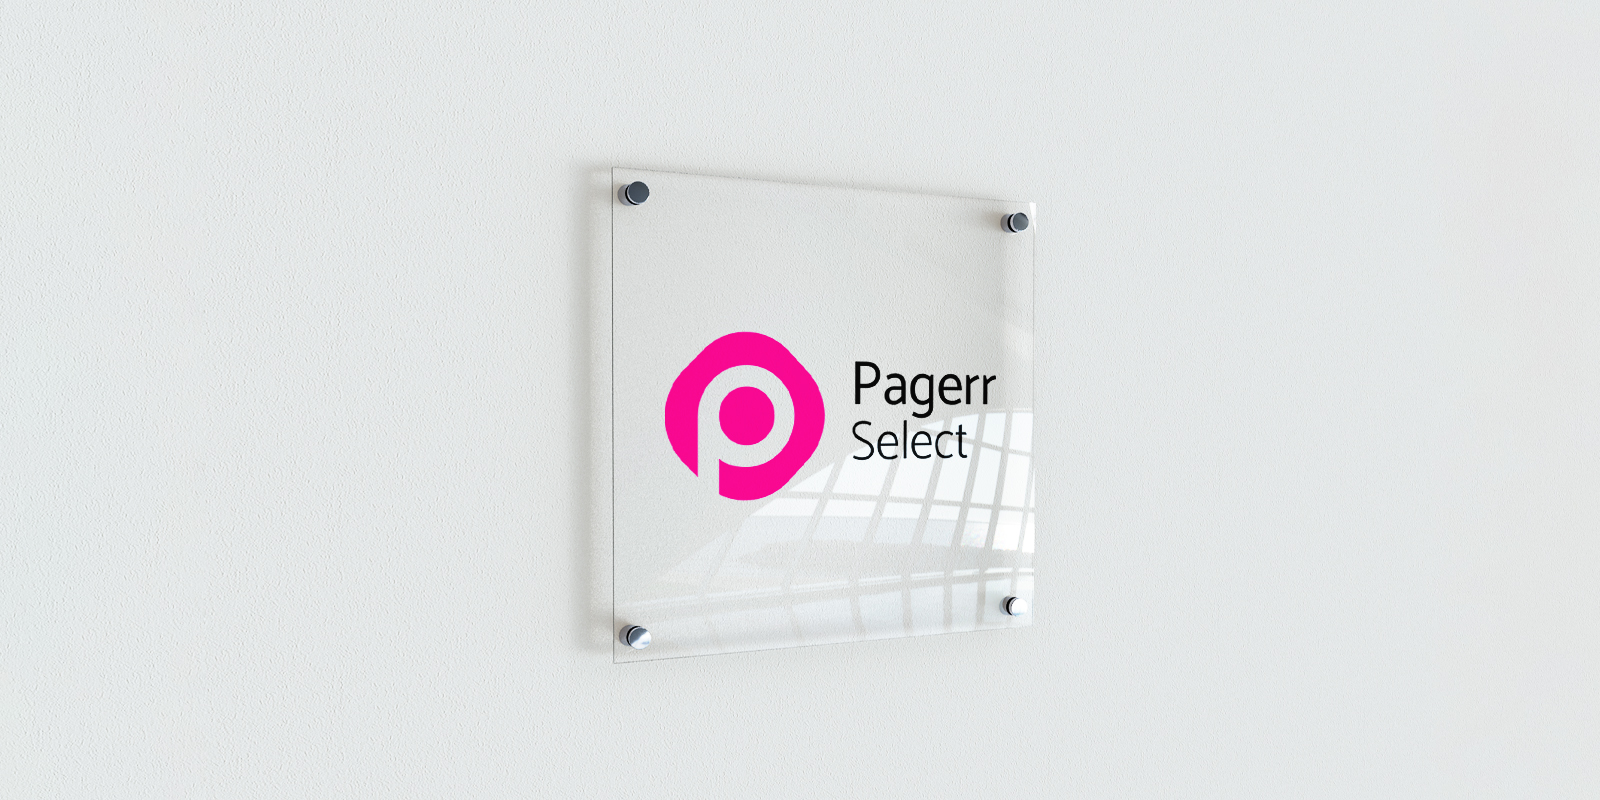 Acrylic signs in Madrid - Print with Pagerr